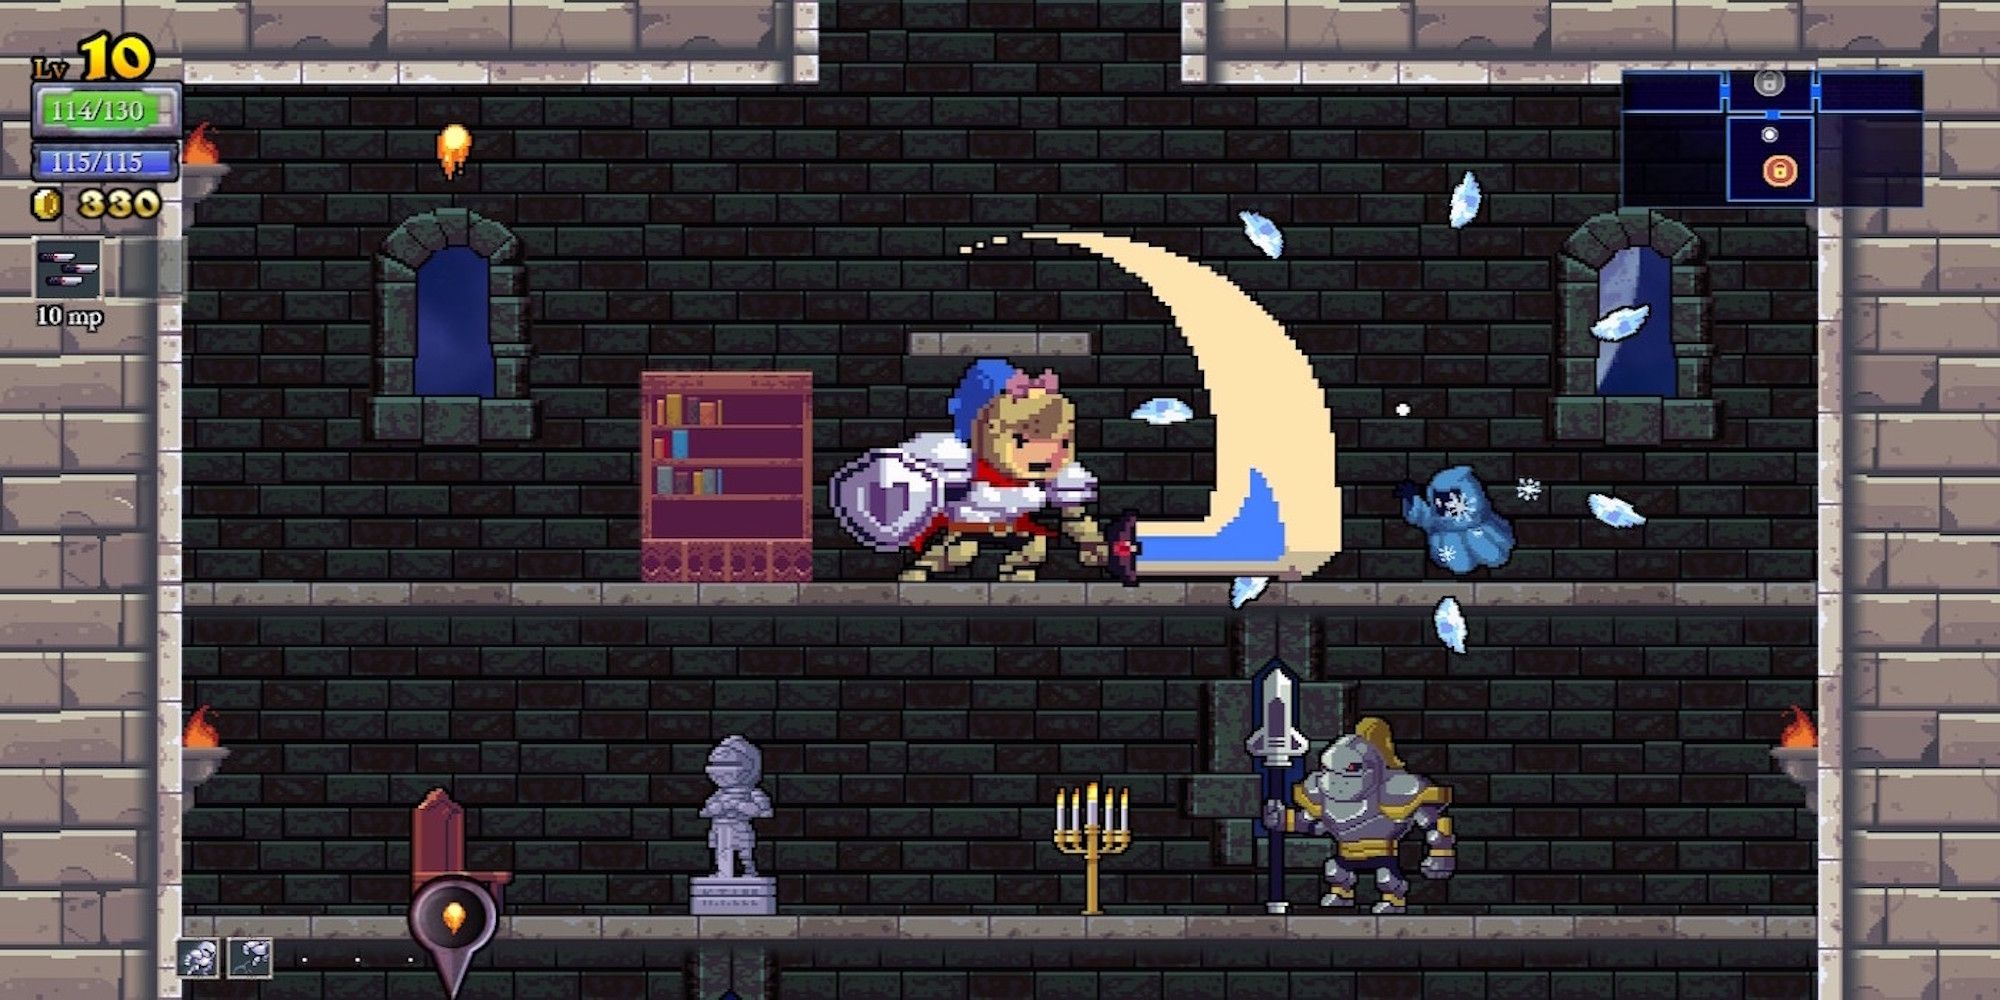 Fight enemies in Rogue Legacy